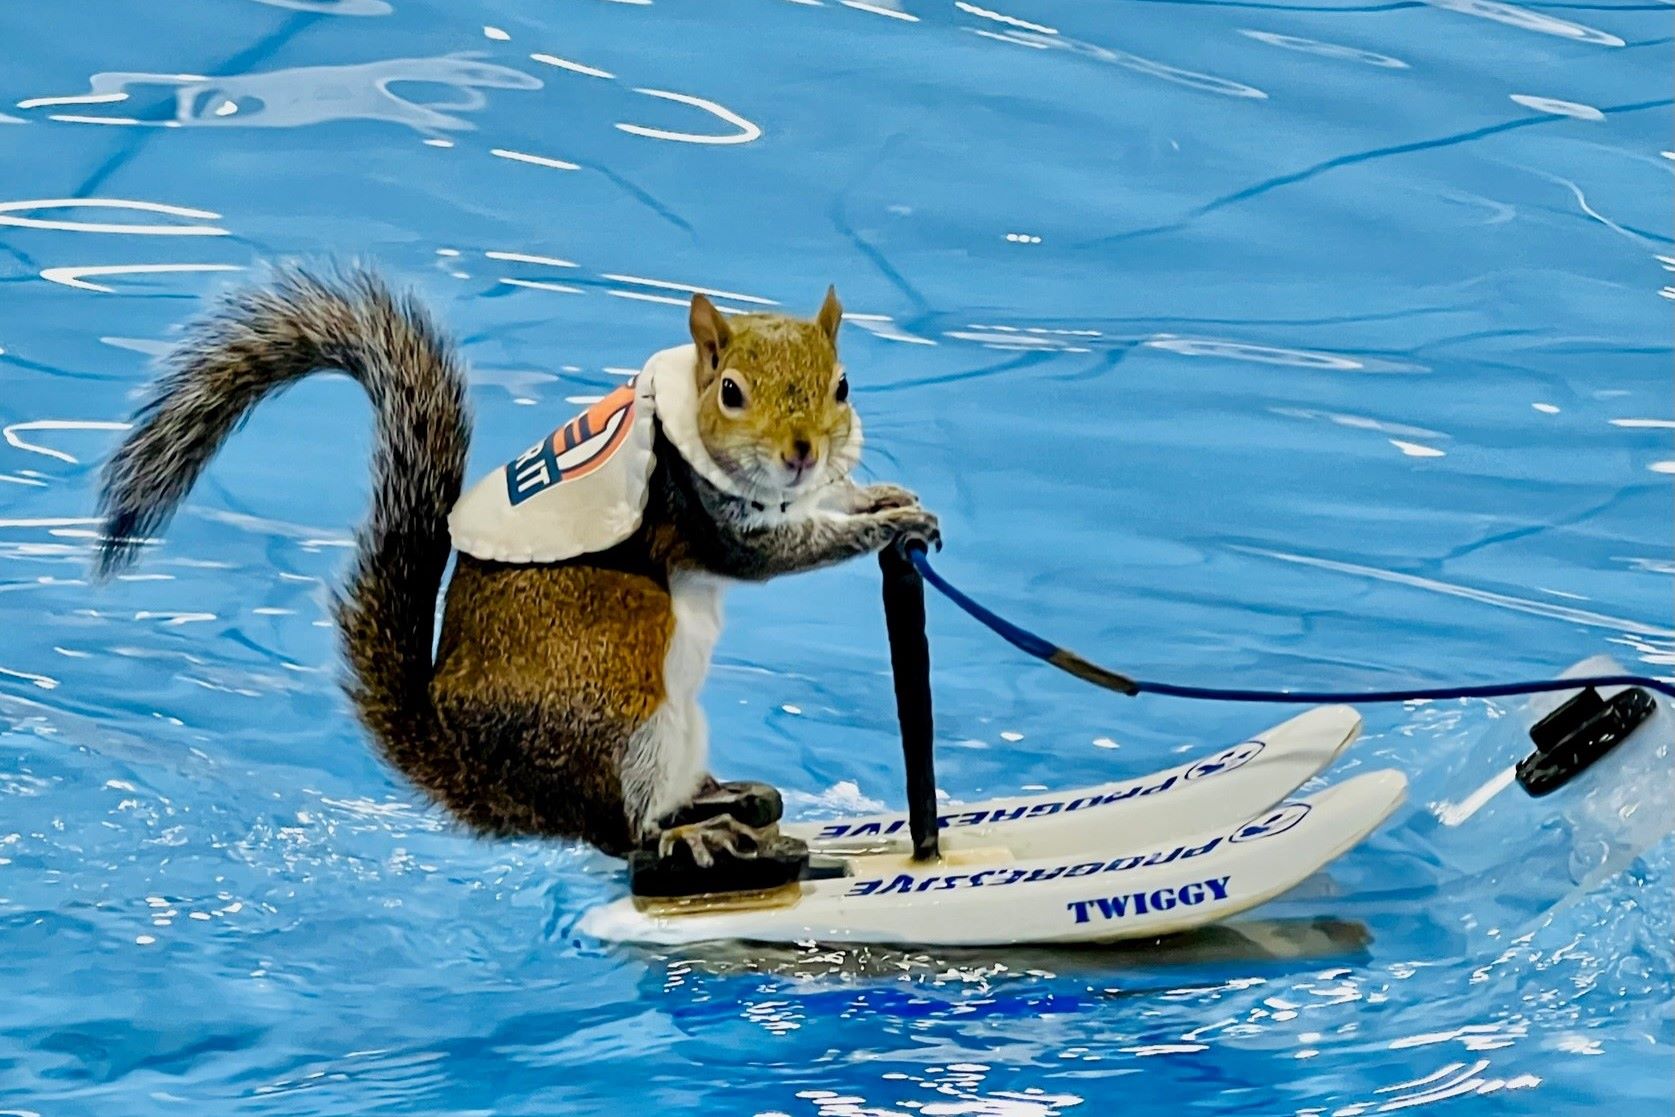 Unbelievable: Watch These Squirrels Nail Synchronized Swimming Routines!